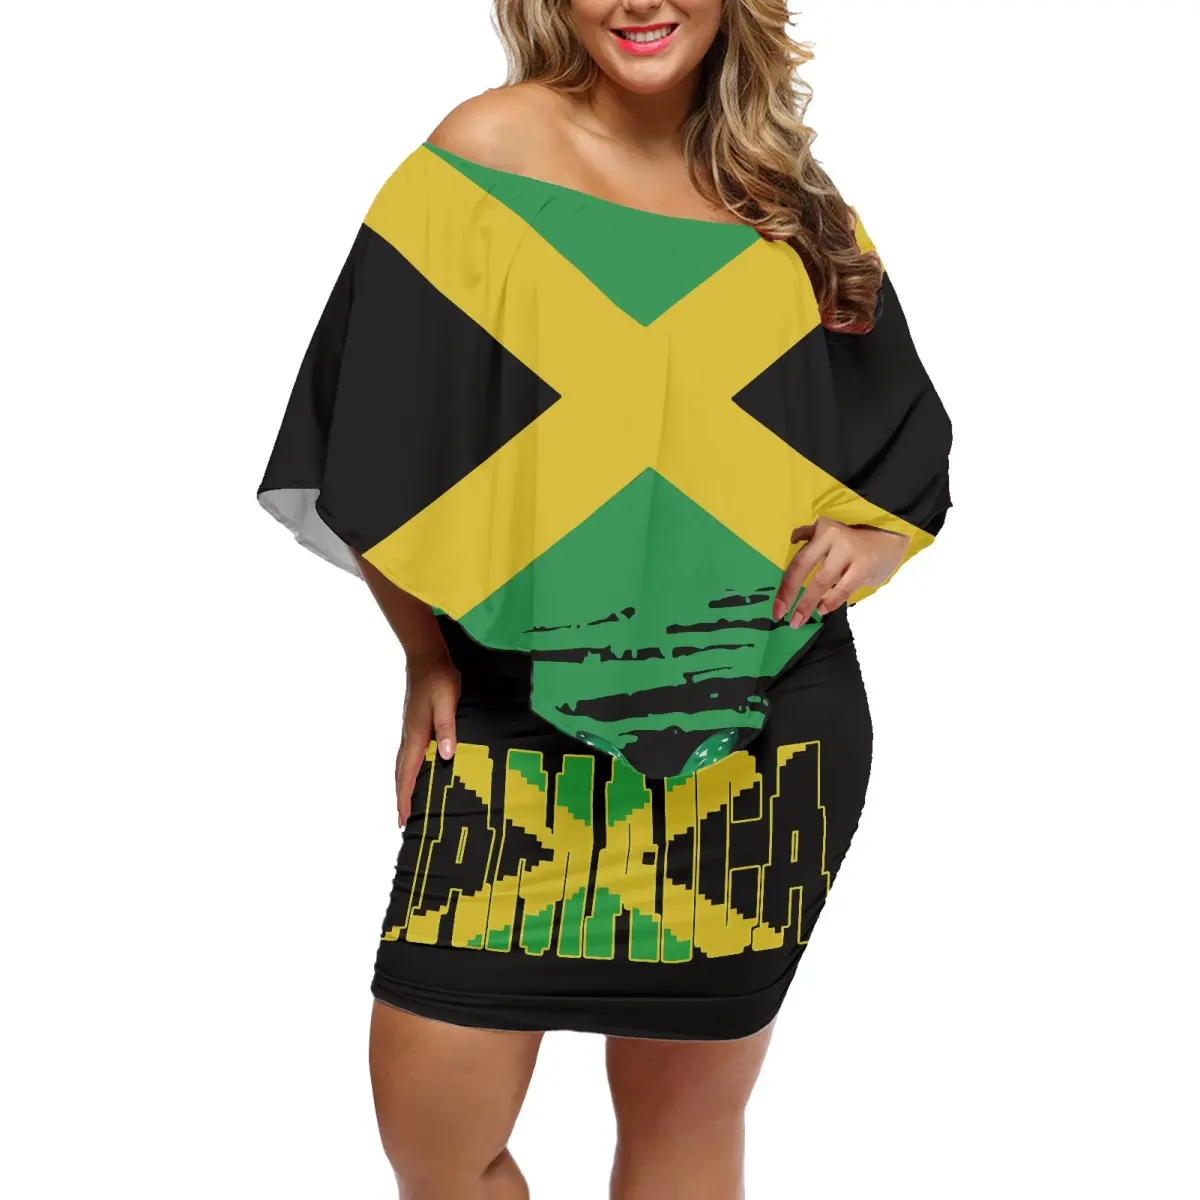 Custom Flag Printed Plus Size Women's Dresses Women Modest Jamaica Flag Design Night Dresses for Woman Sexy Clothes Casual Party